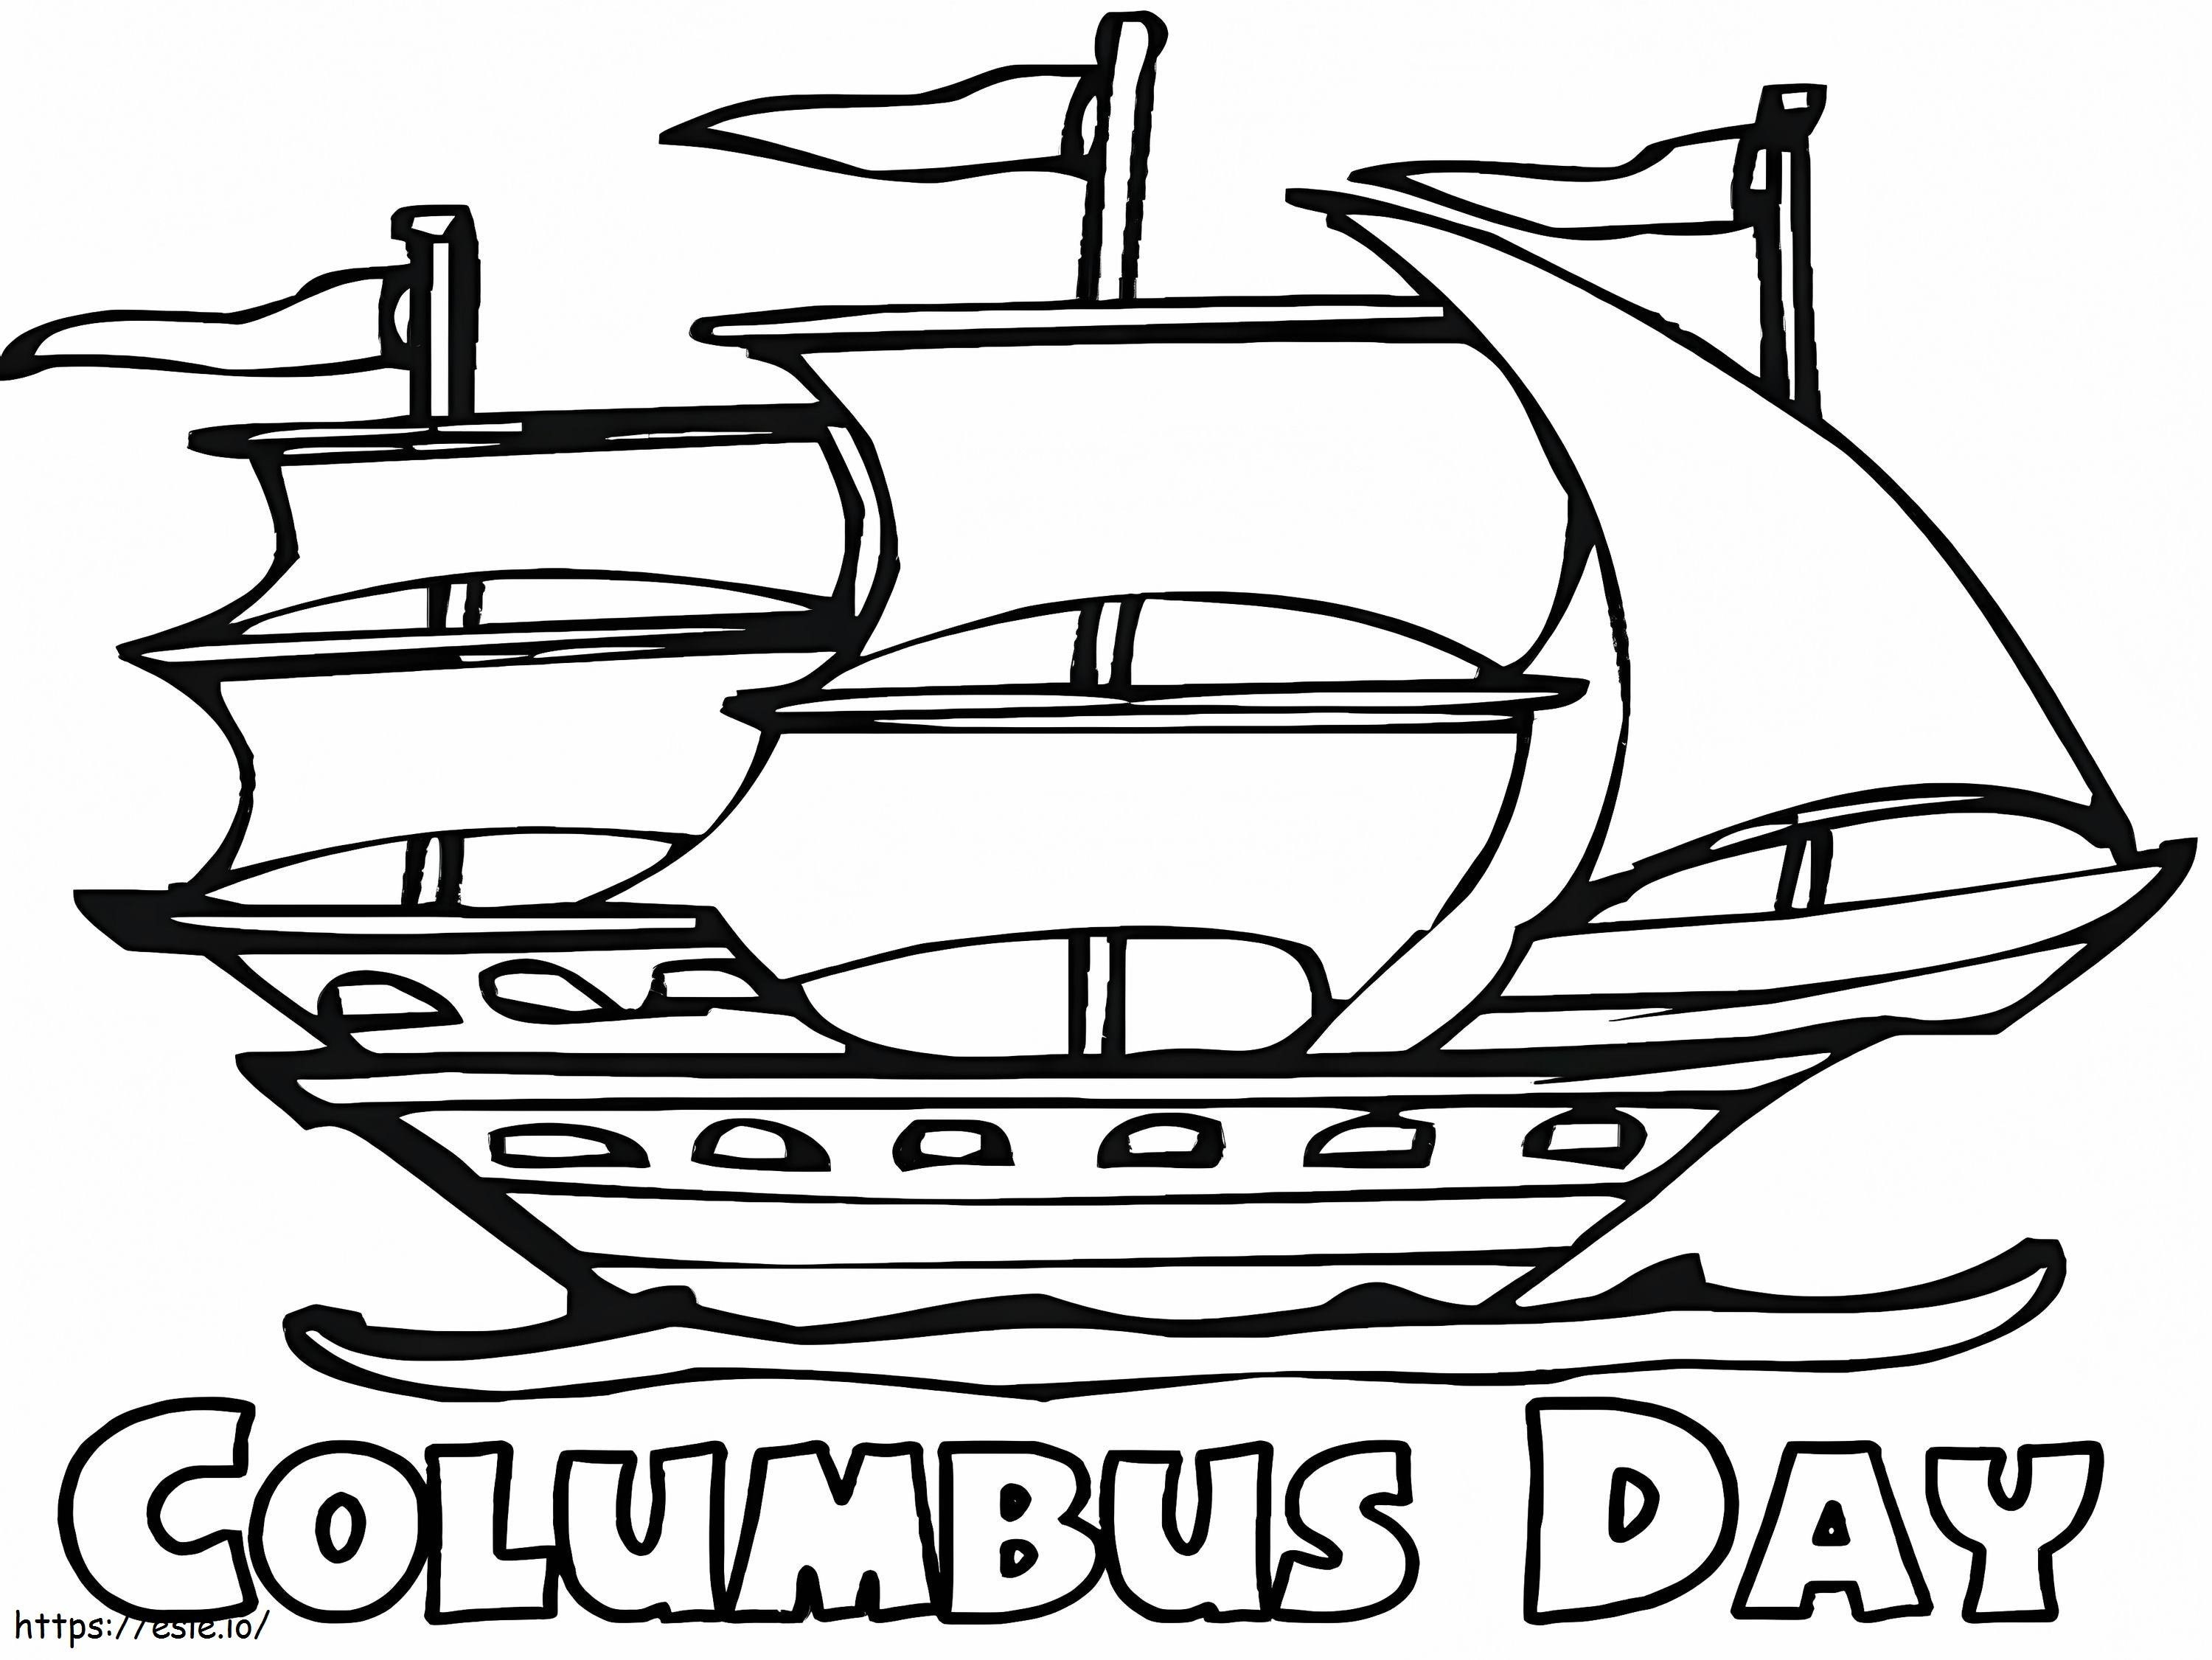 Columbus Day 8 coloring page